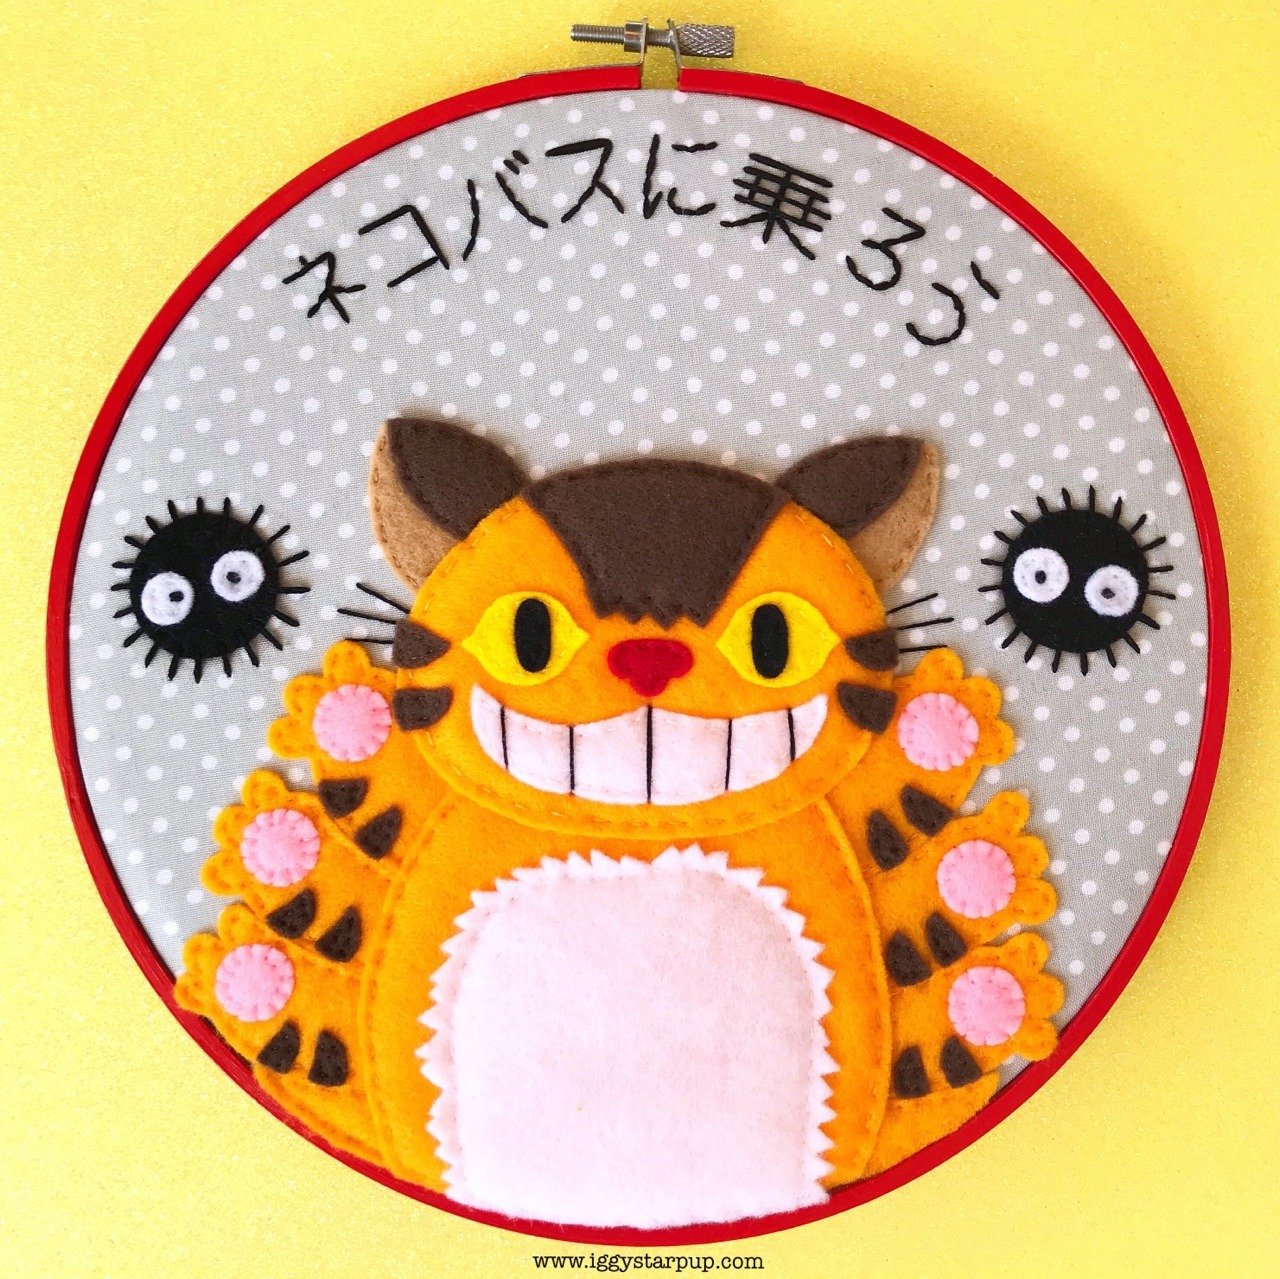 Totoro Embroidery Pattern And The Kittens From Mars My Neighbor Totoro Catbus Embroidery